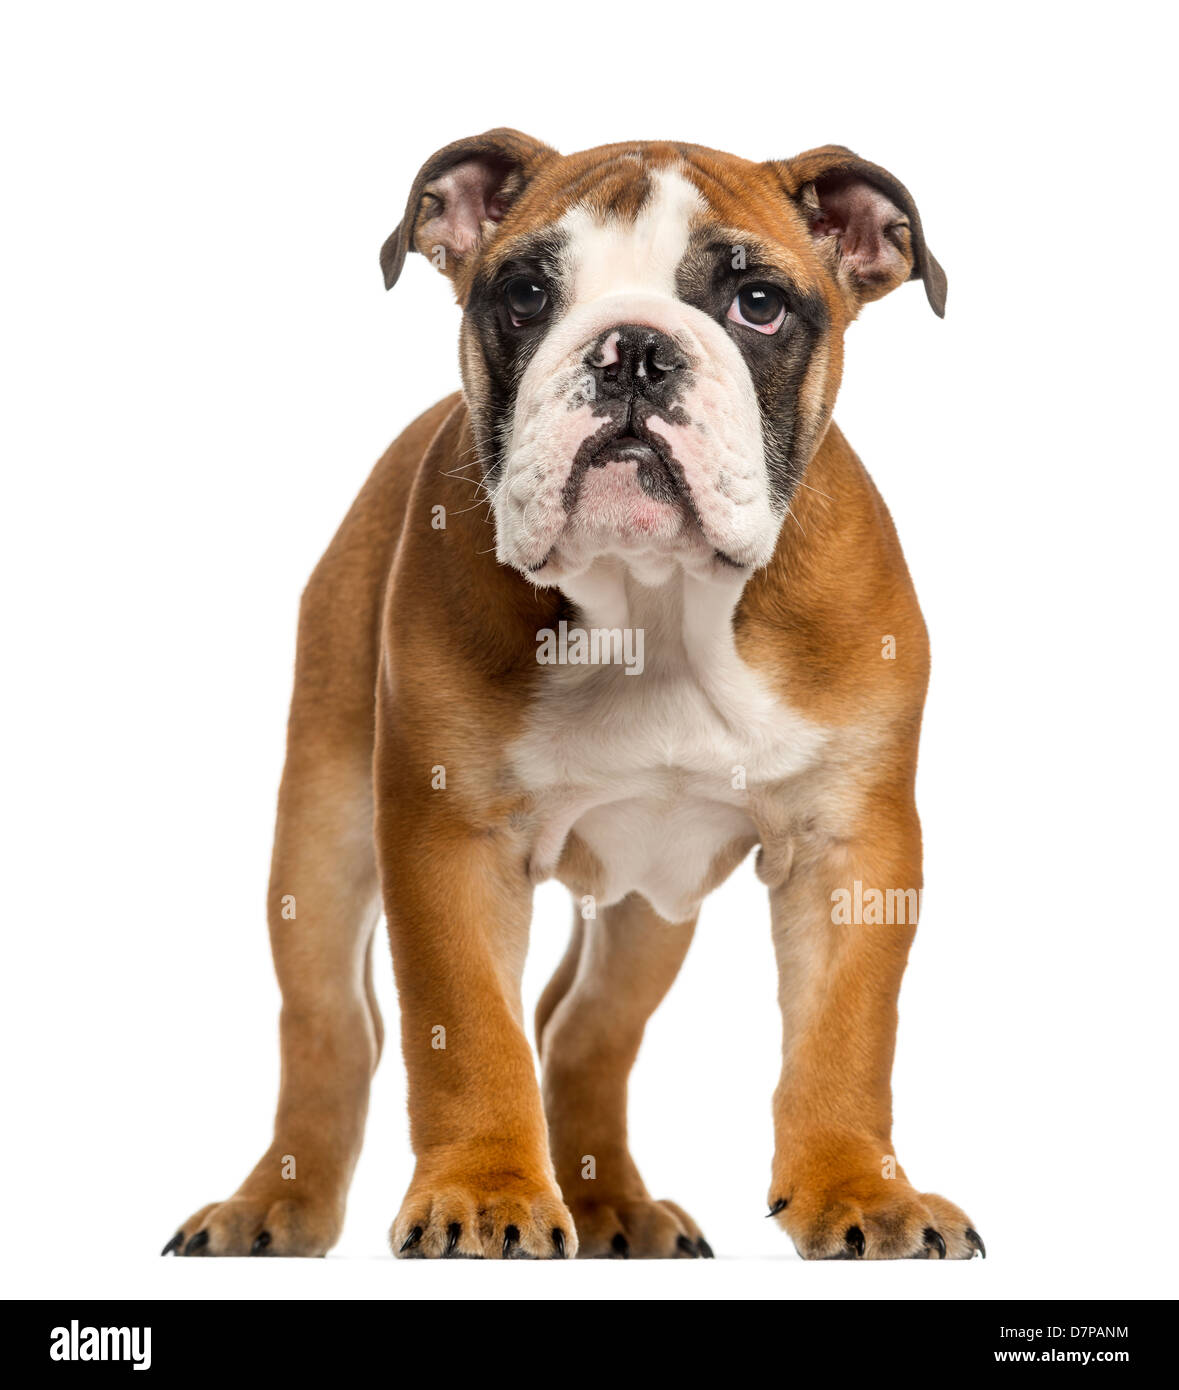 Chiot bouledogue anglais, 3,5 mois, standing against white background Banque D'Images